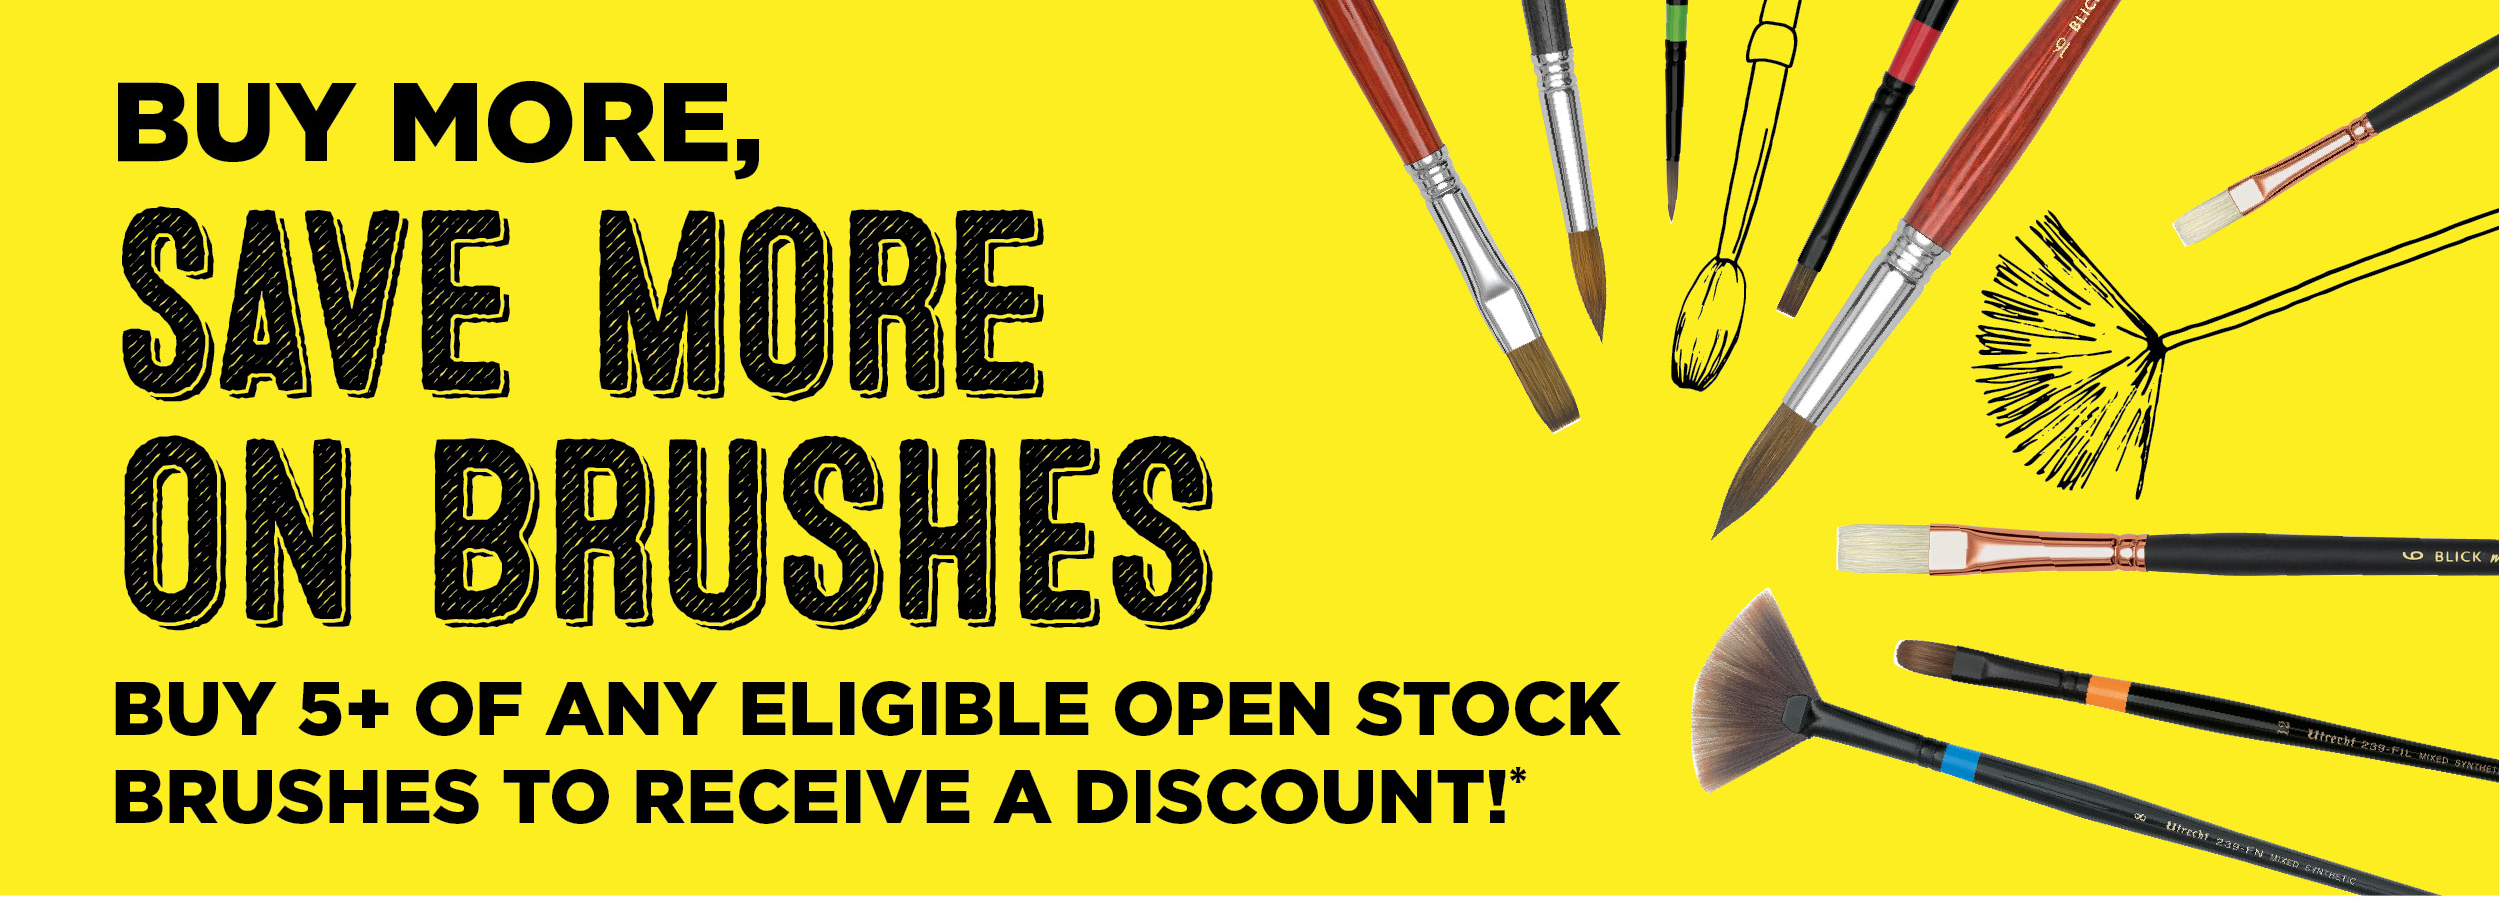 Buy 5+ on any eligible open stock brushes to receive a discount